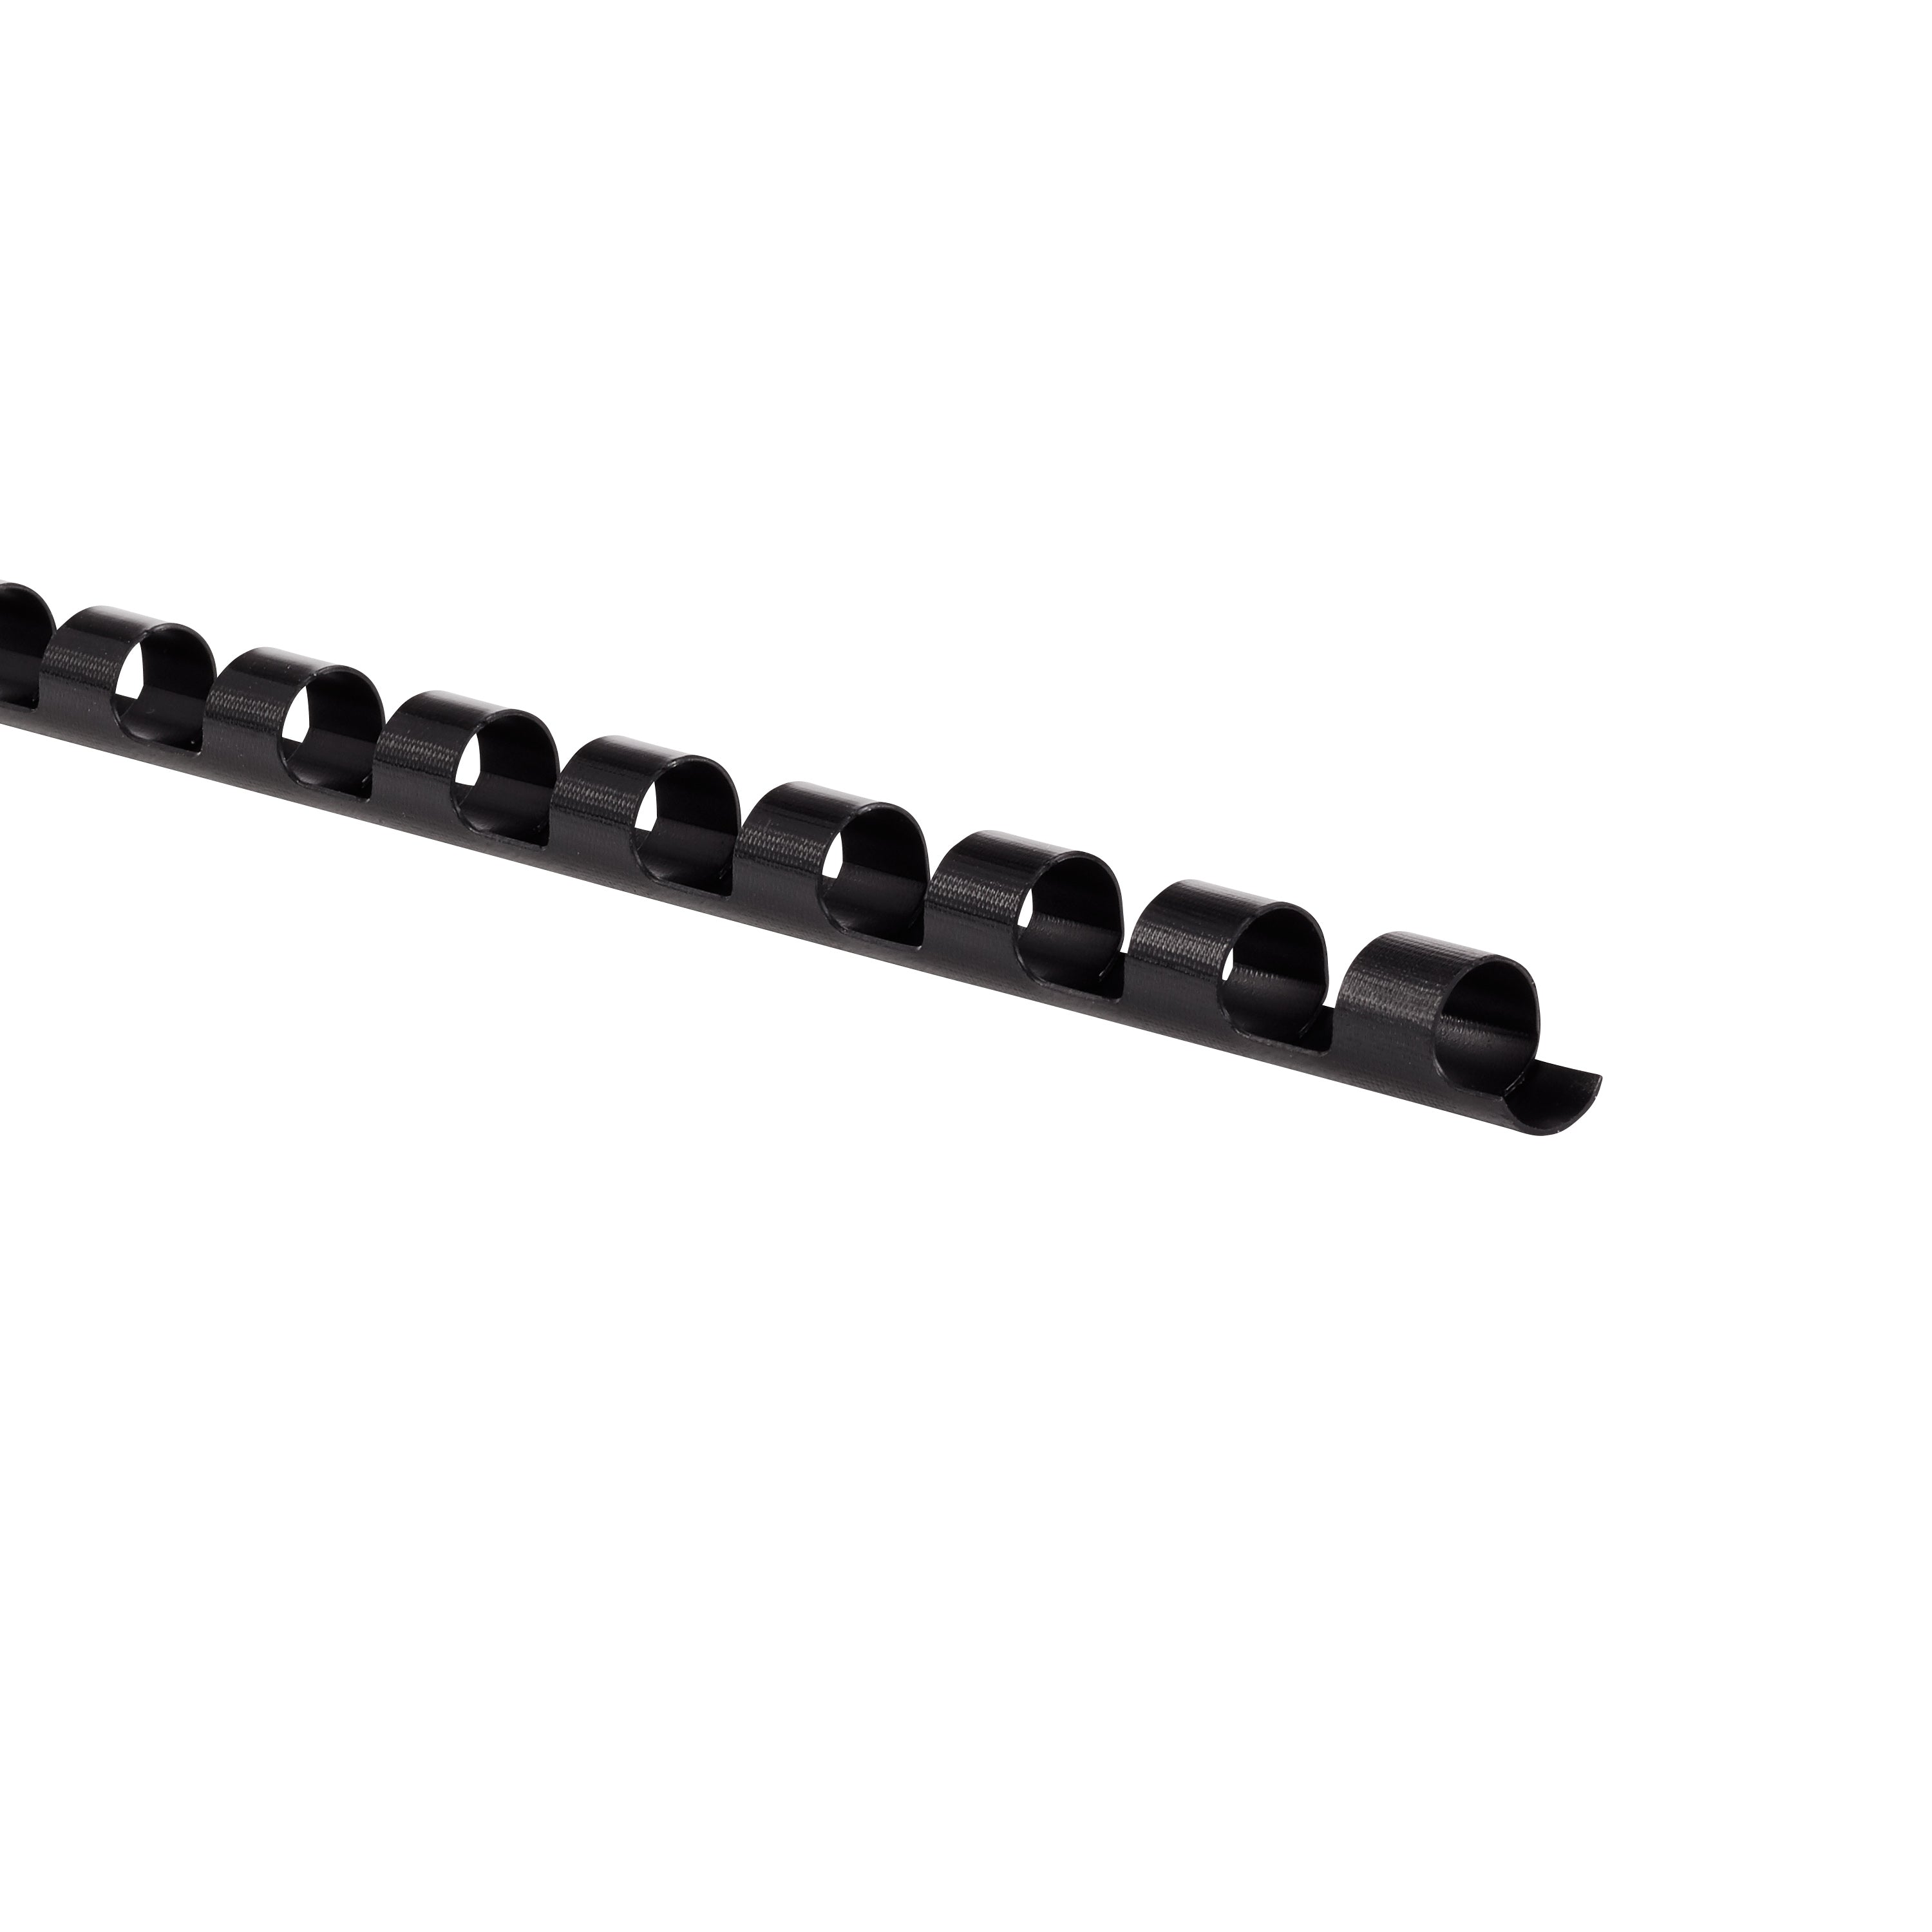 GBC CombBind 1/4" Binding Spines (25 Pack)